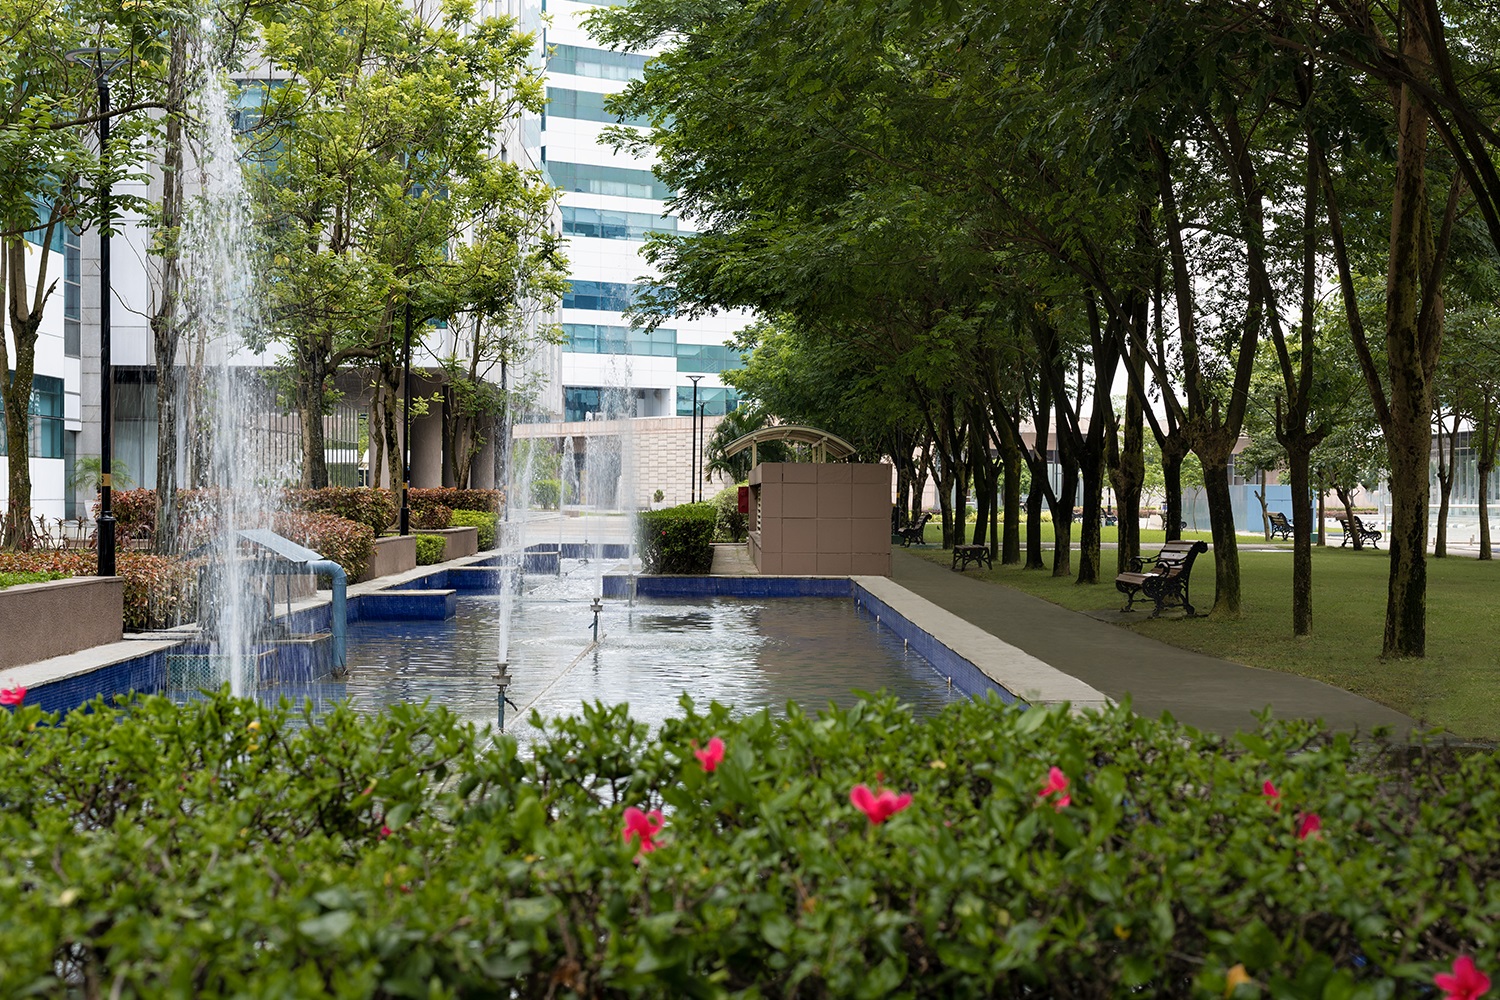 Candor Techspace, outdoor fountains and park benches in landscaped area